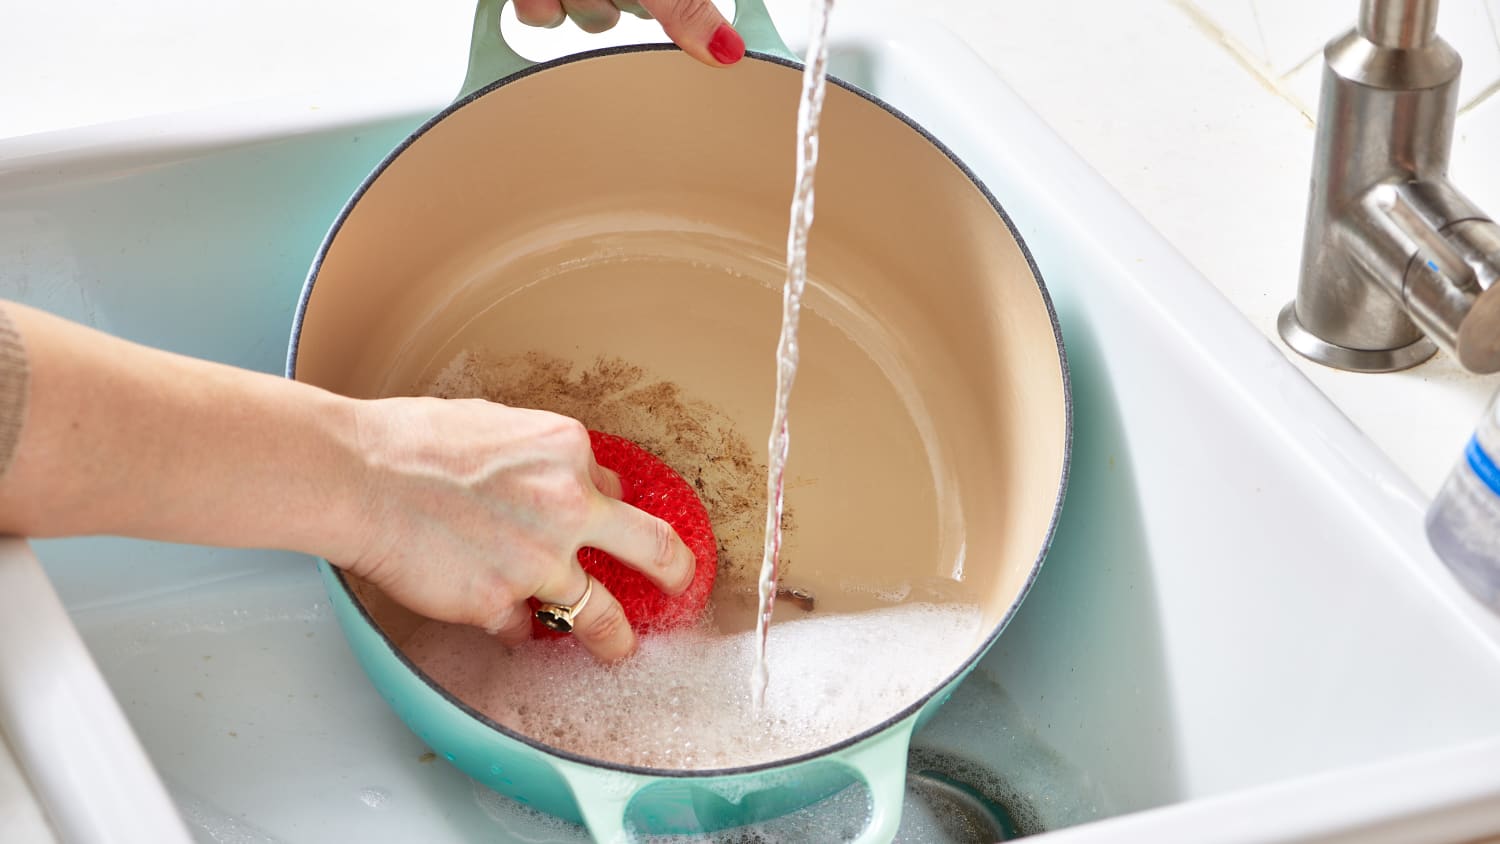 How to Hand Wash Dishes - Cleaning & Sanitizing Dishes By Hand | Apartment Therapy